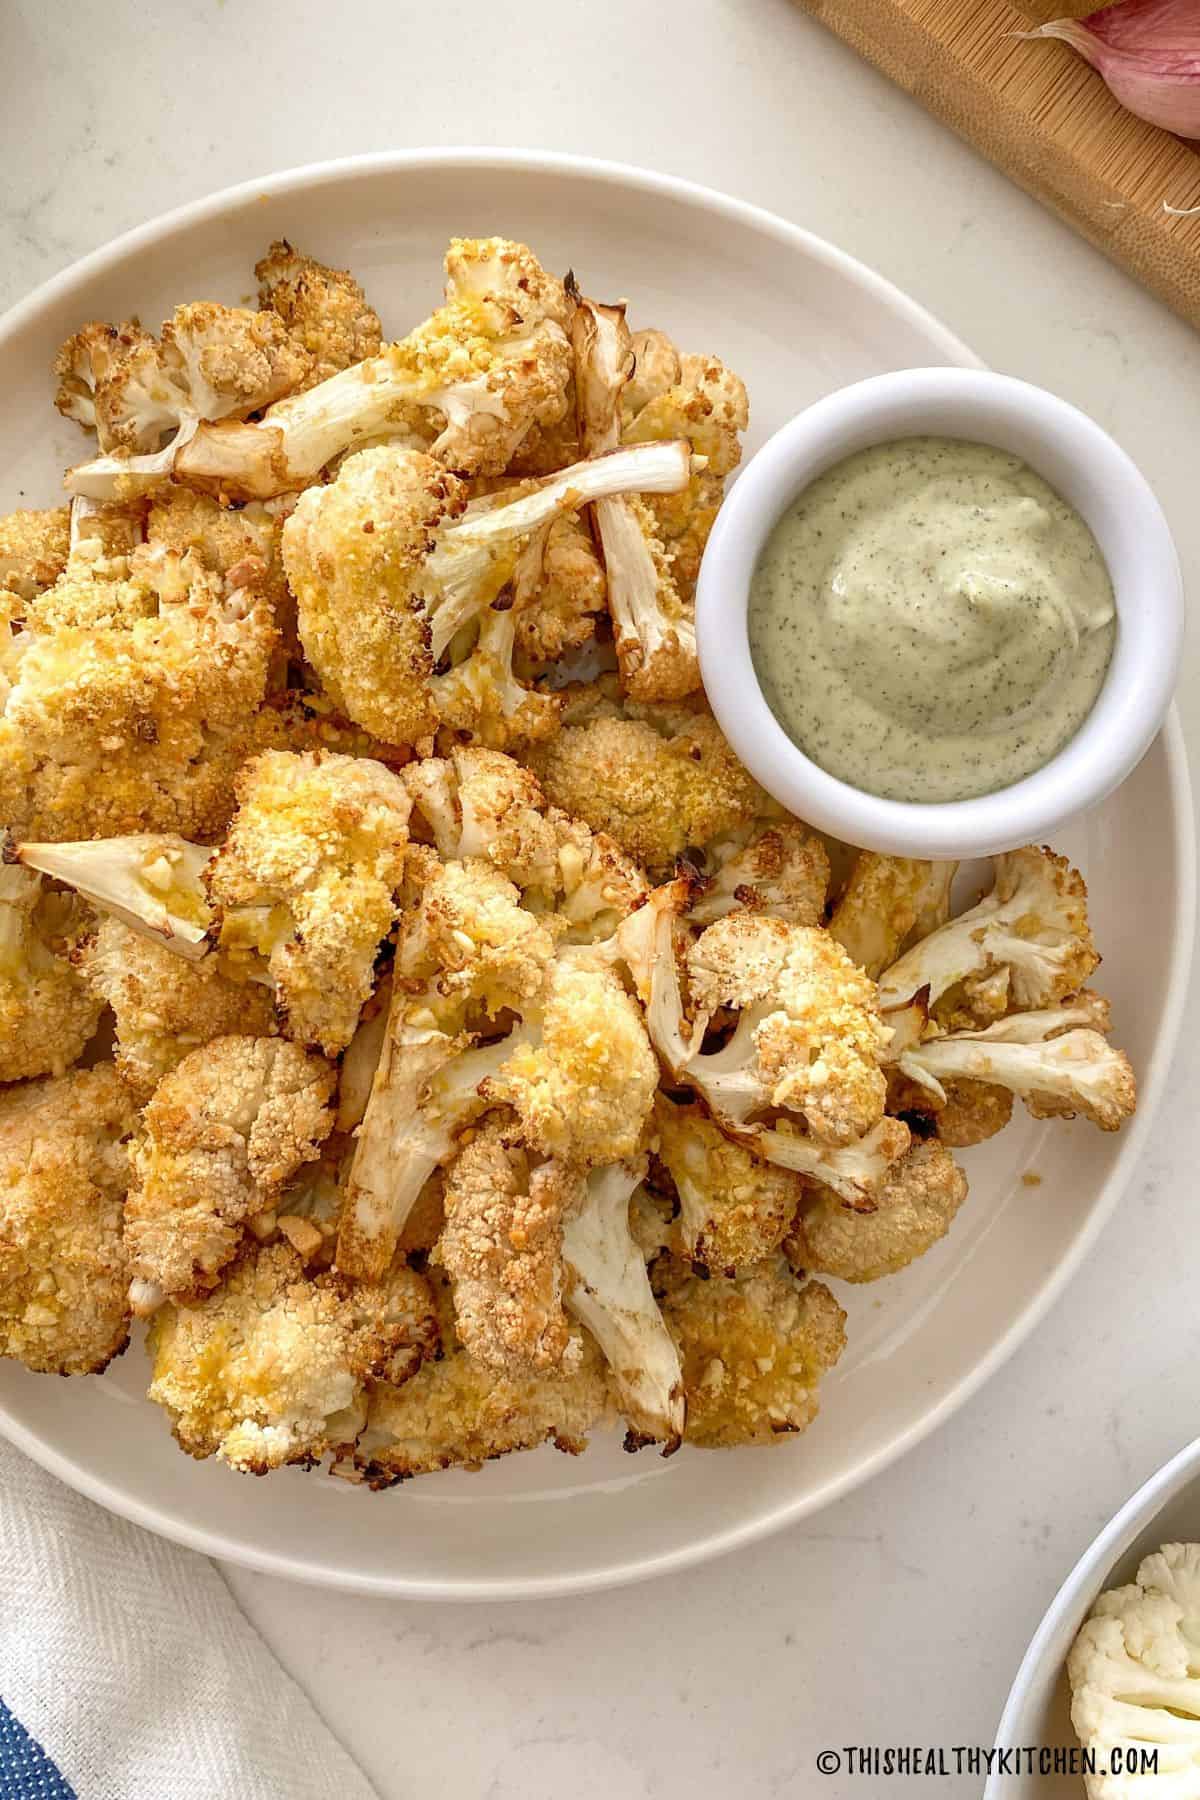 Roasted cauliflower in white plate with small bowl of dipping sauce beside it.